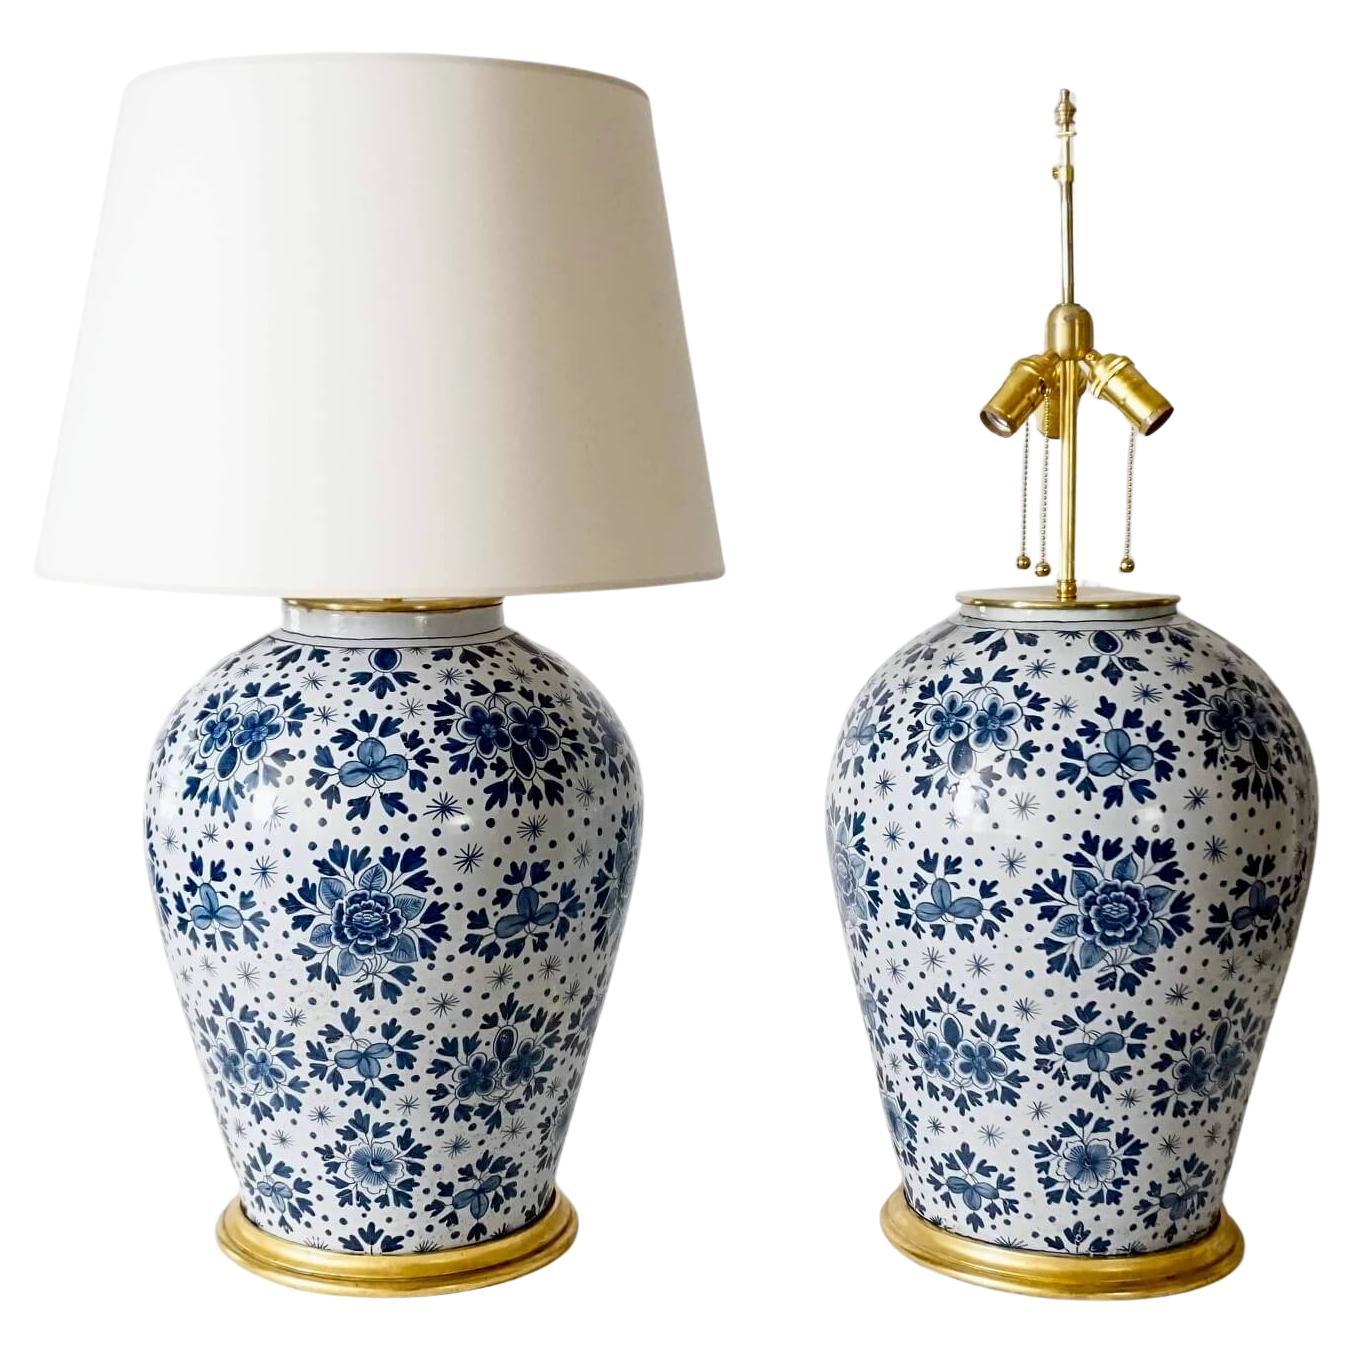 Pair of Large Scale Blue and White Dutch Delft Vase Table Lamps, circa 1850